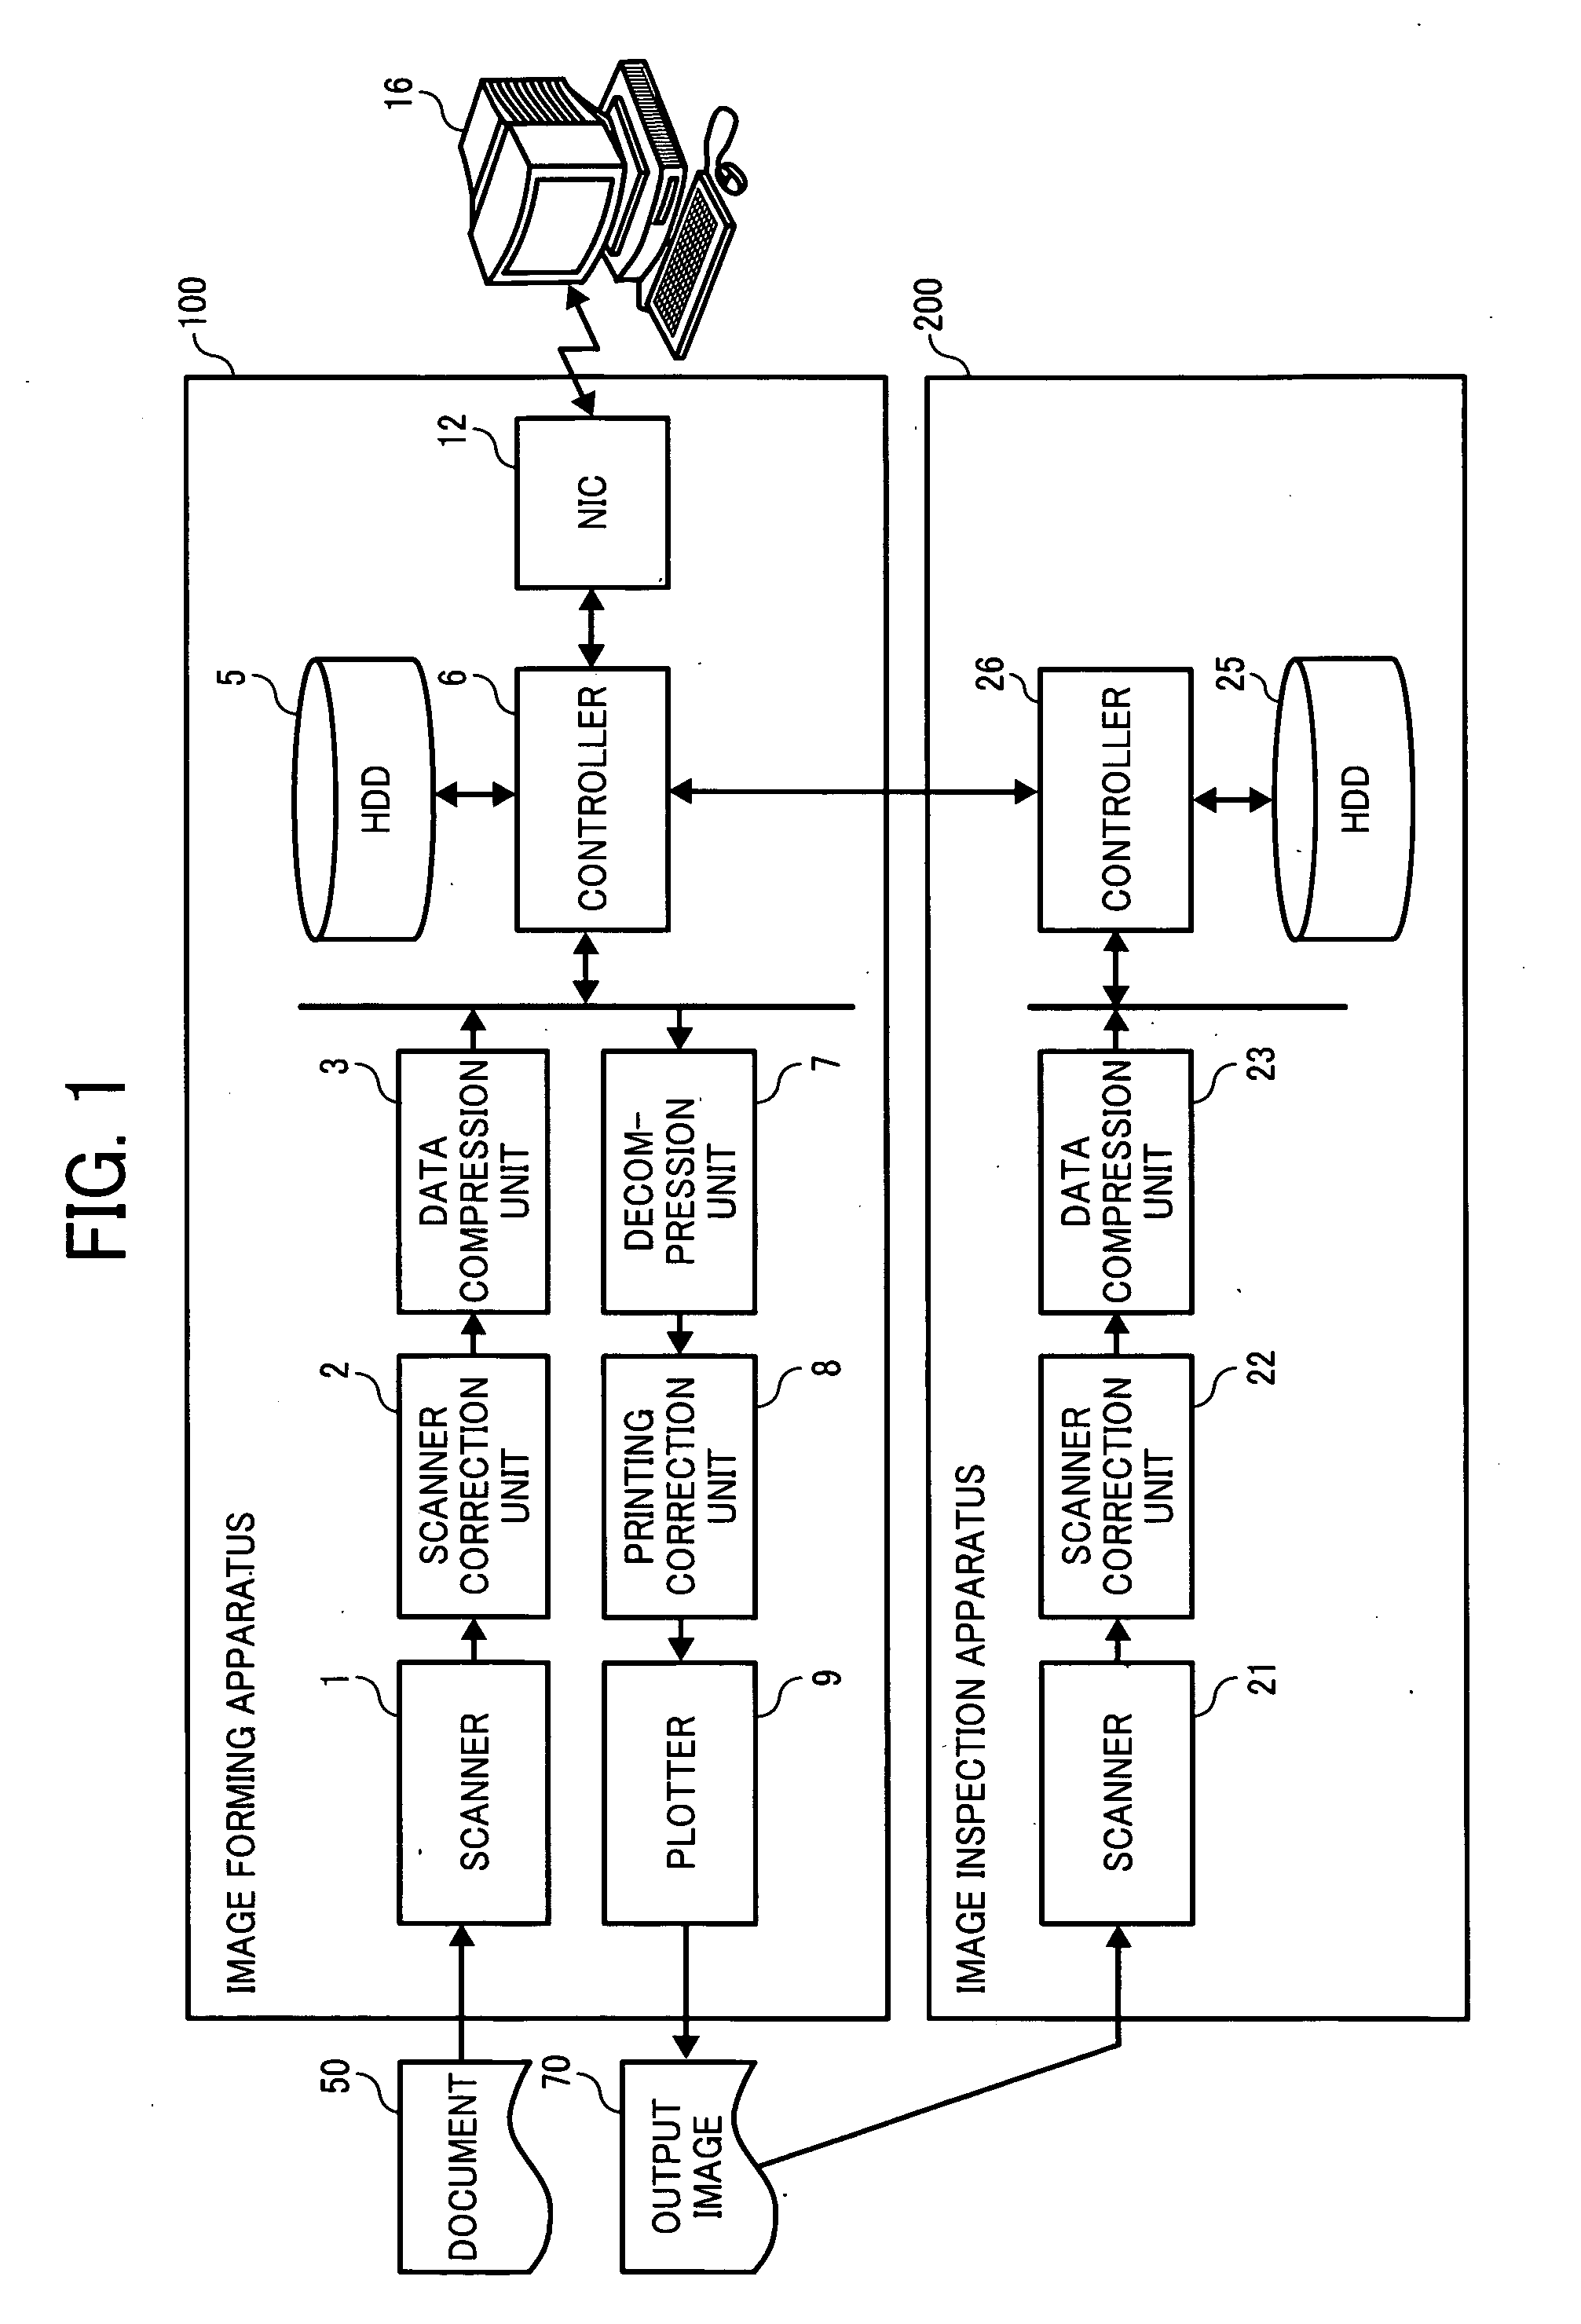 Image inspection system, image inspection method, and computer-readable medium storing an image inspection program